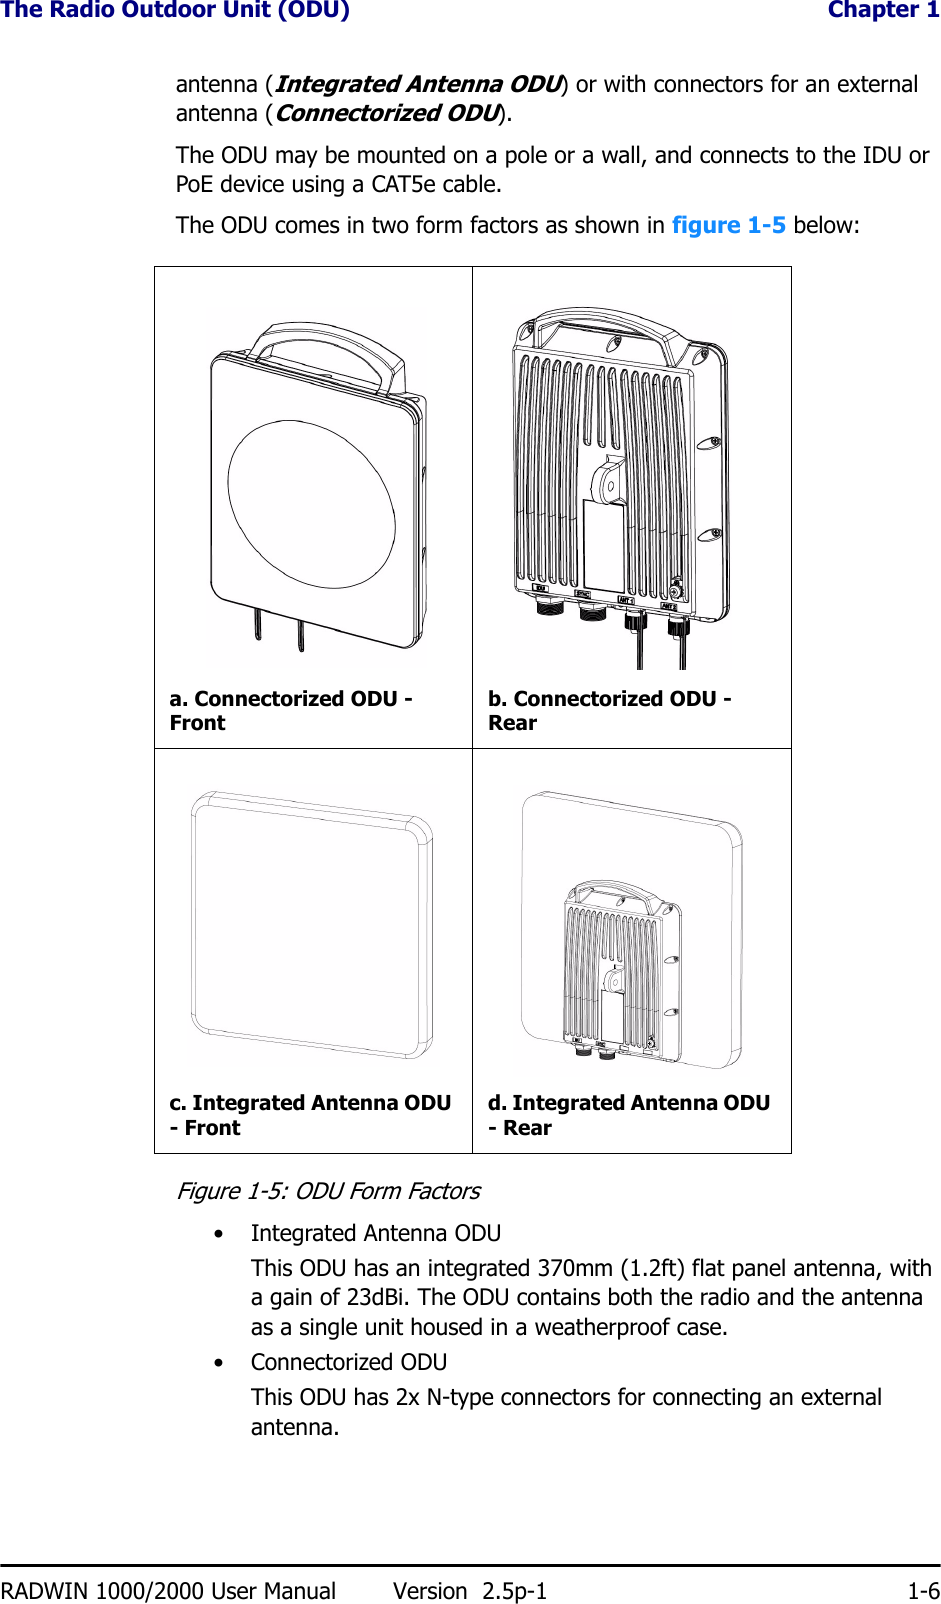 The Radio Outdoor Unit (ODU)  Chapter 1RADWIN 1000/2000 User Manual Version  2.5p-1 1-6antenna (Integrated Antenna ODU) or with connectors for an external antenna (Connectorized ODU).The ODU may be mounted on a pole or a wall, and connects to the IDU or PoE device using a CAT5e cable.The ODU comes in two form factors as shown in figure 1-5 below:Figure 1-5: ODU Form Factors• Integrated Antenna ODUThis ODU has an integrated 370mm (1.2ft) flat panel antenna, with a gain of 23dBi. The ODU contains both the radio and the antenna as a single unit housed in a weatherproof case.•Connectorized ODUThis ODU has 2x N-type connectors for connecting an external antenna.a. Connectorized ODU - Frontb. Connectorized ODU - Rearc. Integrated Antenna ODU - Frontd. Integrated Antenna ODU - Rear